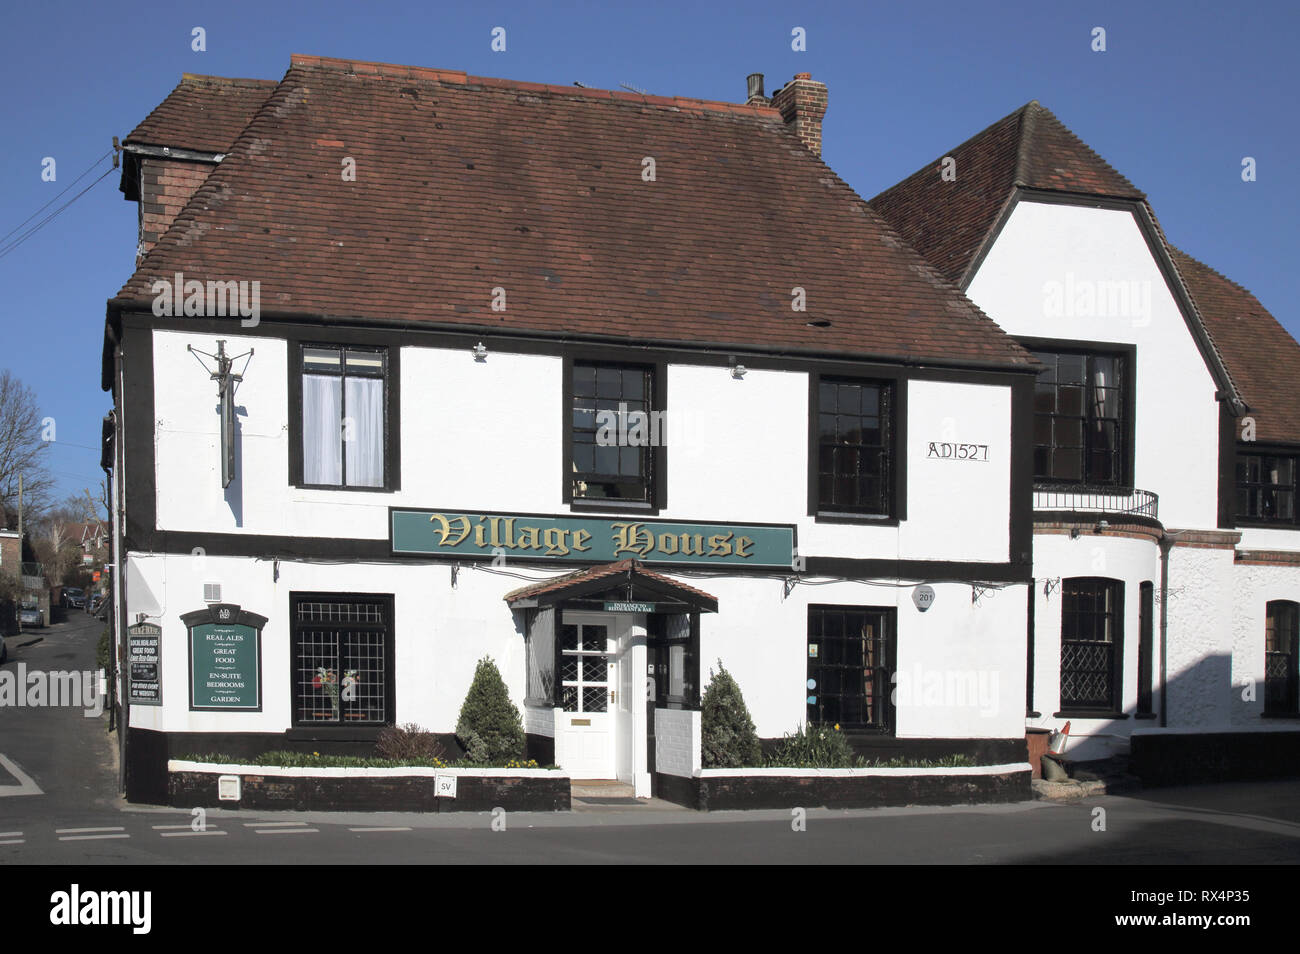 the village house dating from 1527 in findon village in west sussex Stock Photo